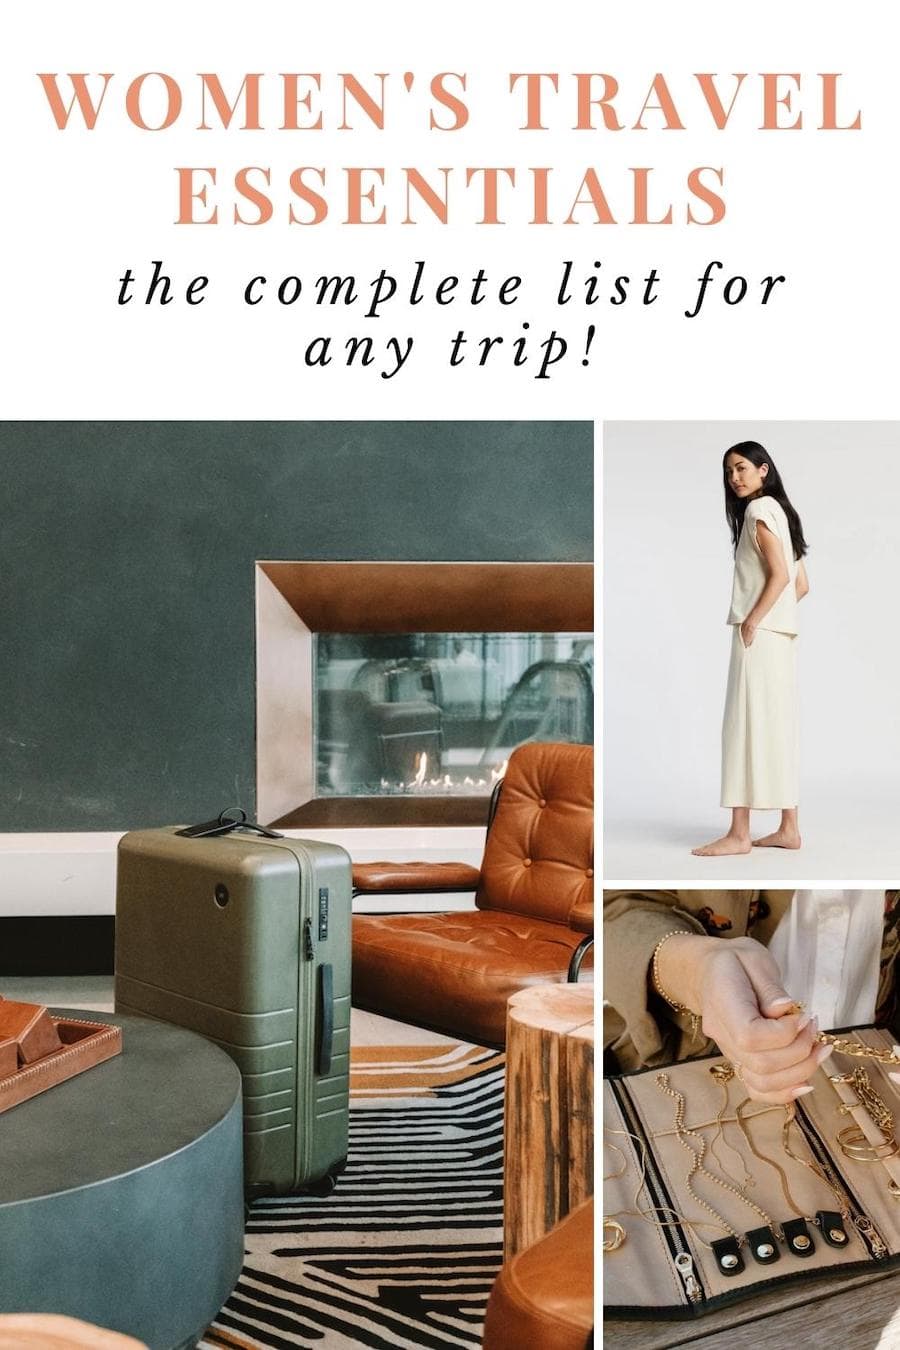 10 travel products every wanderlusting woman needs in her life